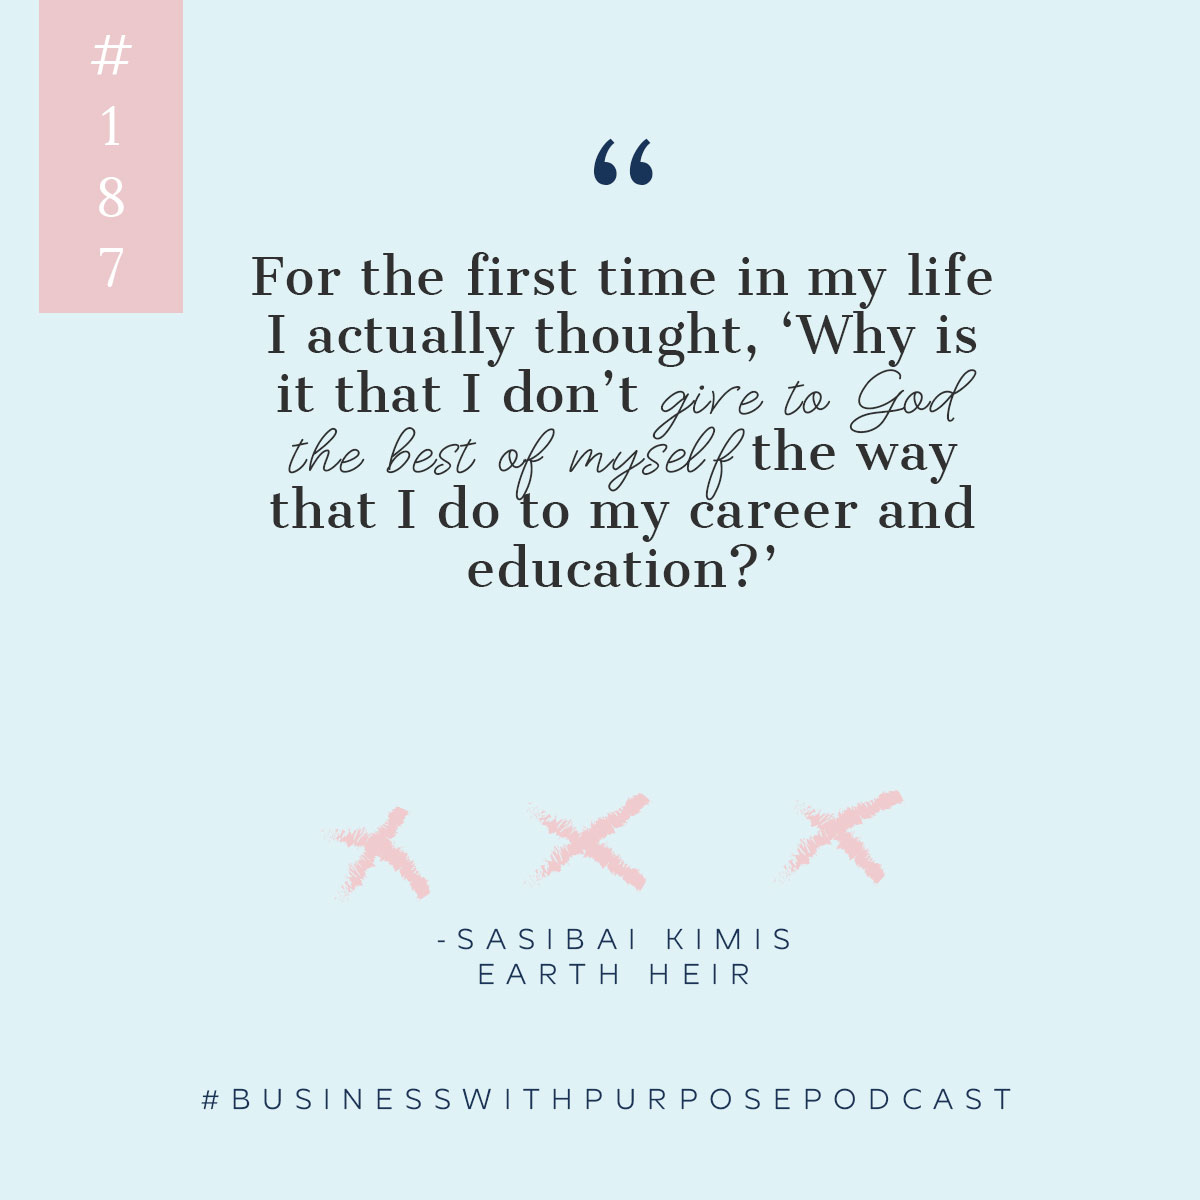 Living & Working For More Than Just A Great Resume | Business with Purpose Podcast EP 187: Sasibai Kimis, Earth Heir